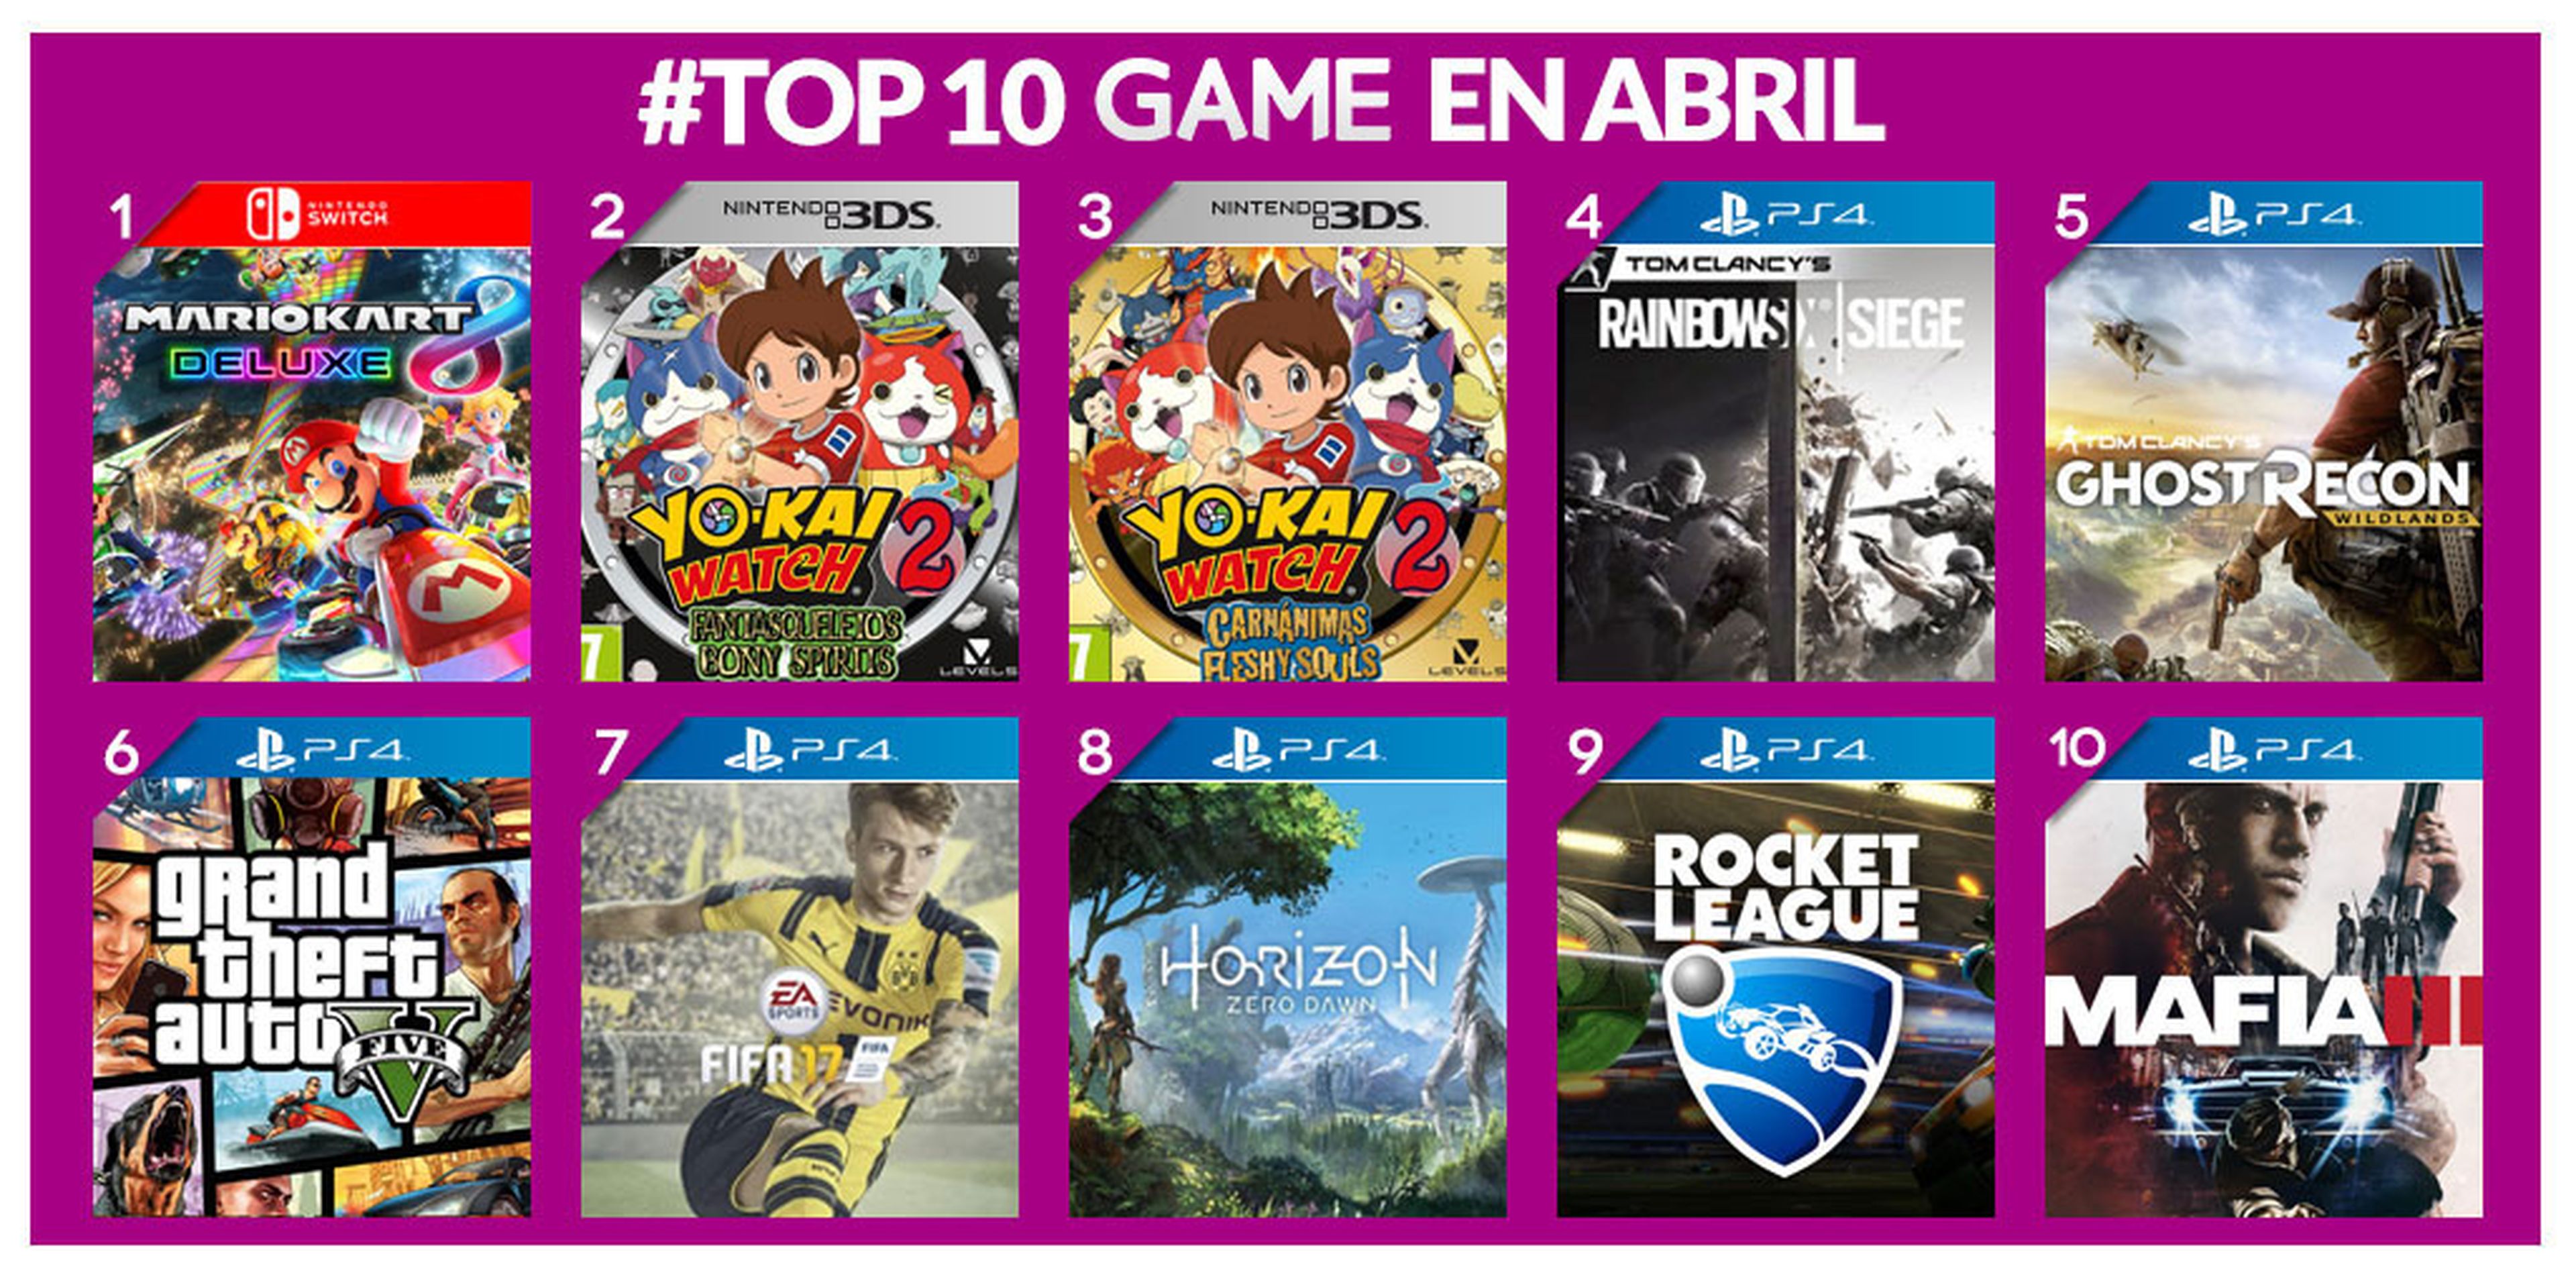 Top 10 GAME abril